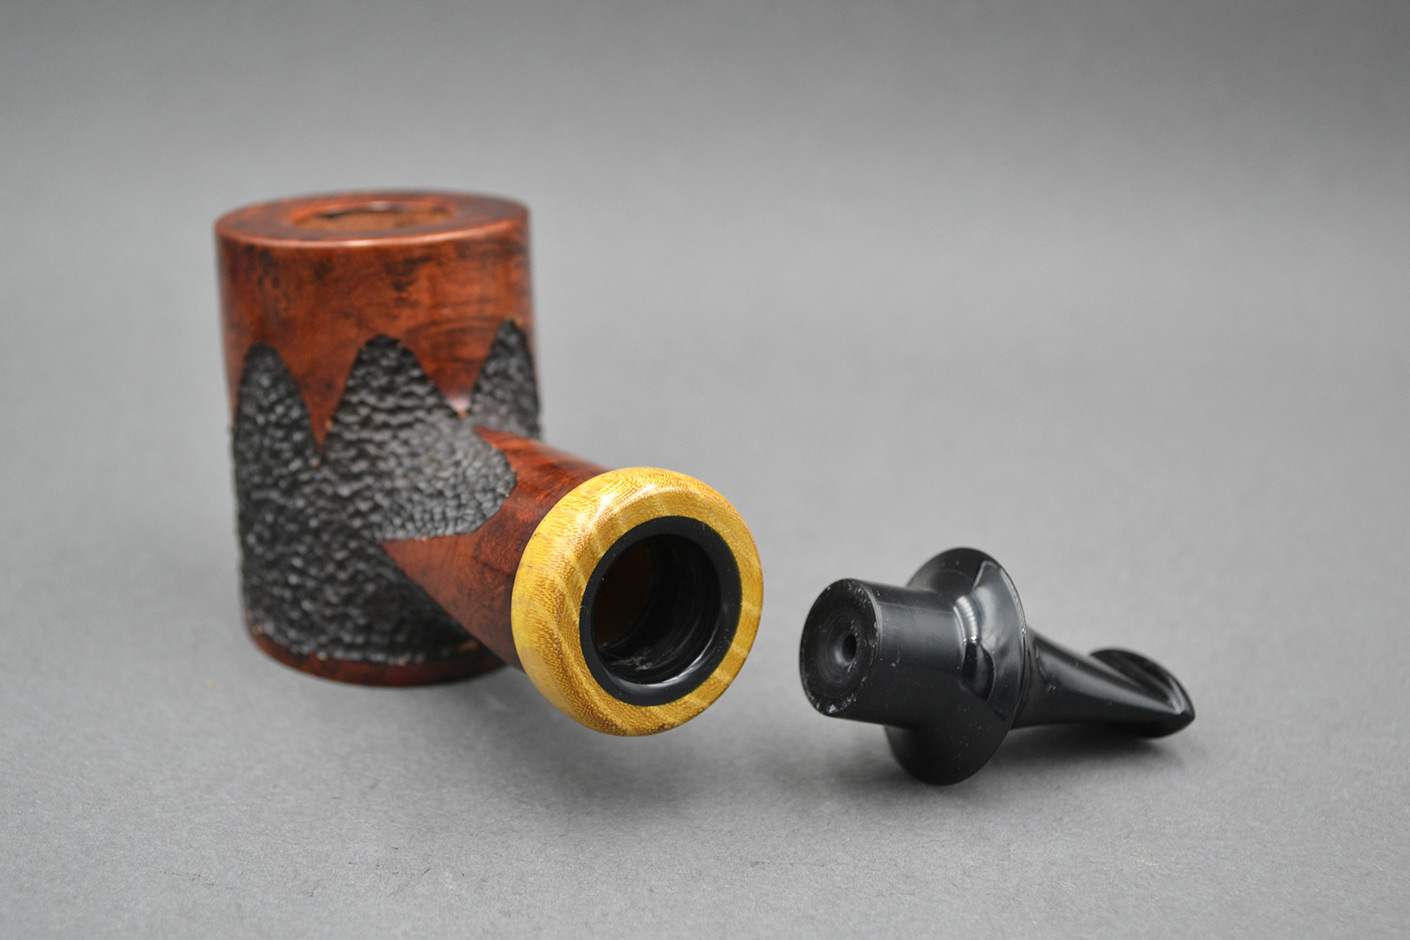 King Reverse Calabash 21133 Handmade Briar Tobacco Pipe by Constantinos Zissis 02